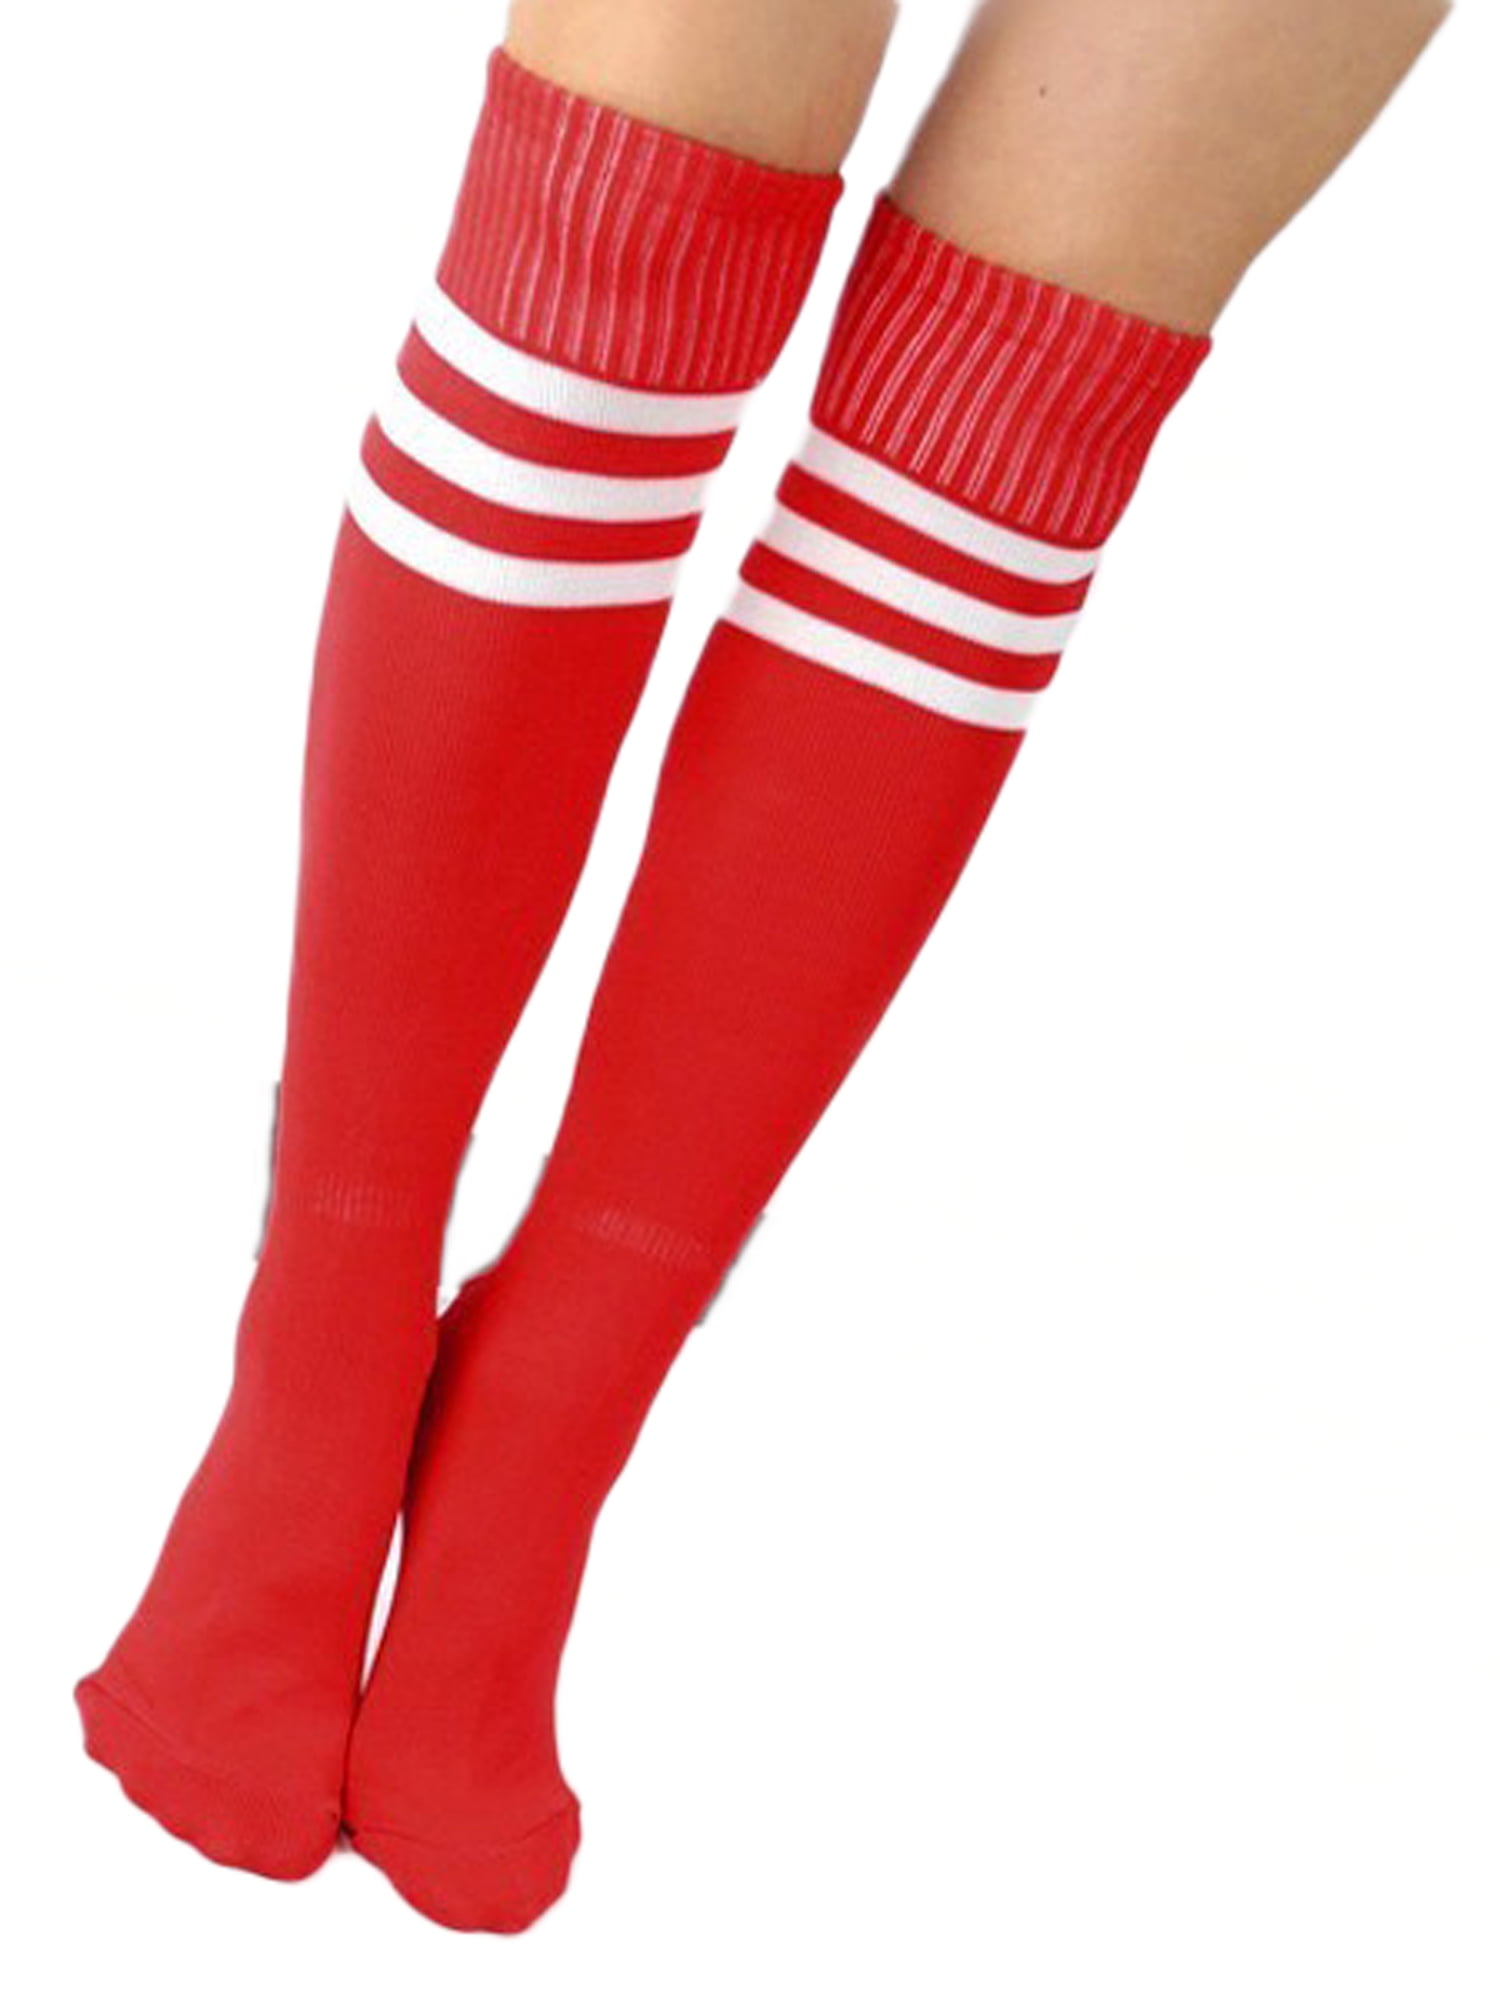 Ladies Thigh High Over-Knee Stocking Women Soccer Rugby Sports Tube SocksCosplay